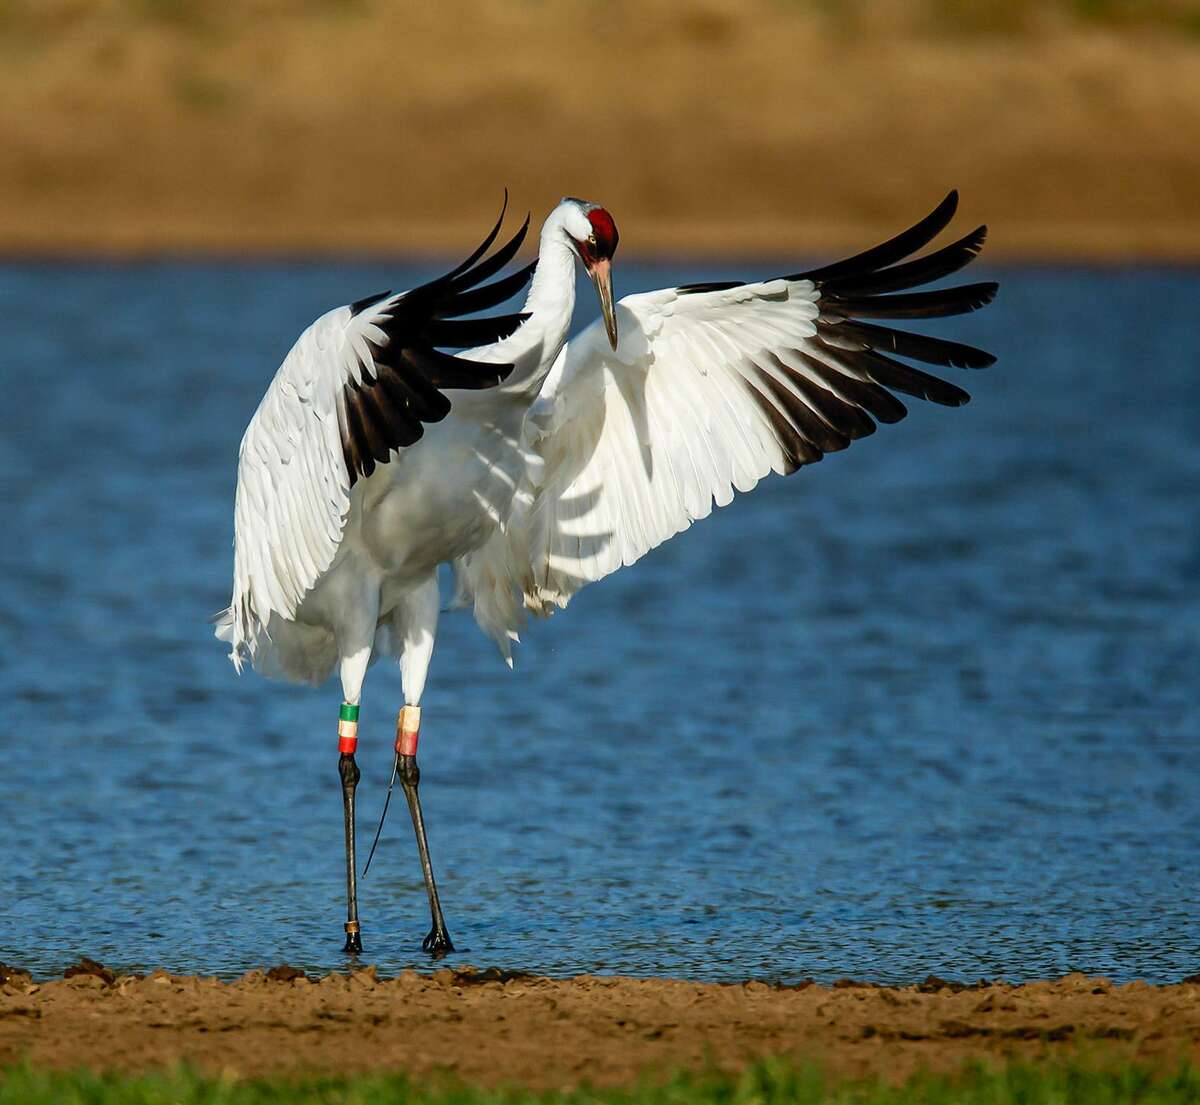 Whooping cranes are an endangered species.